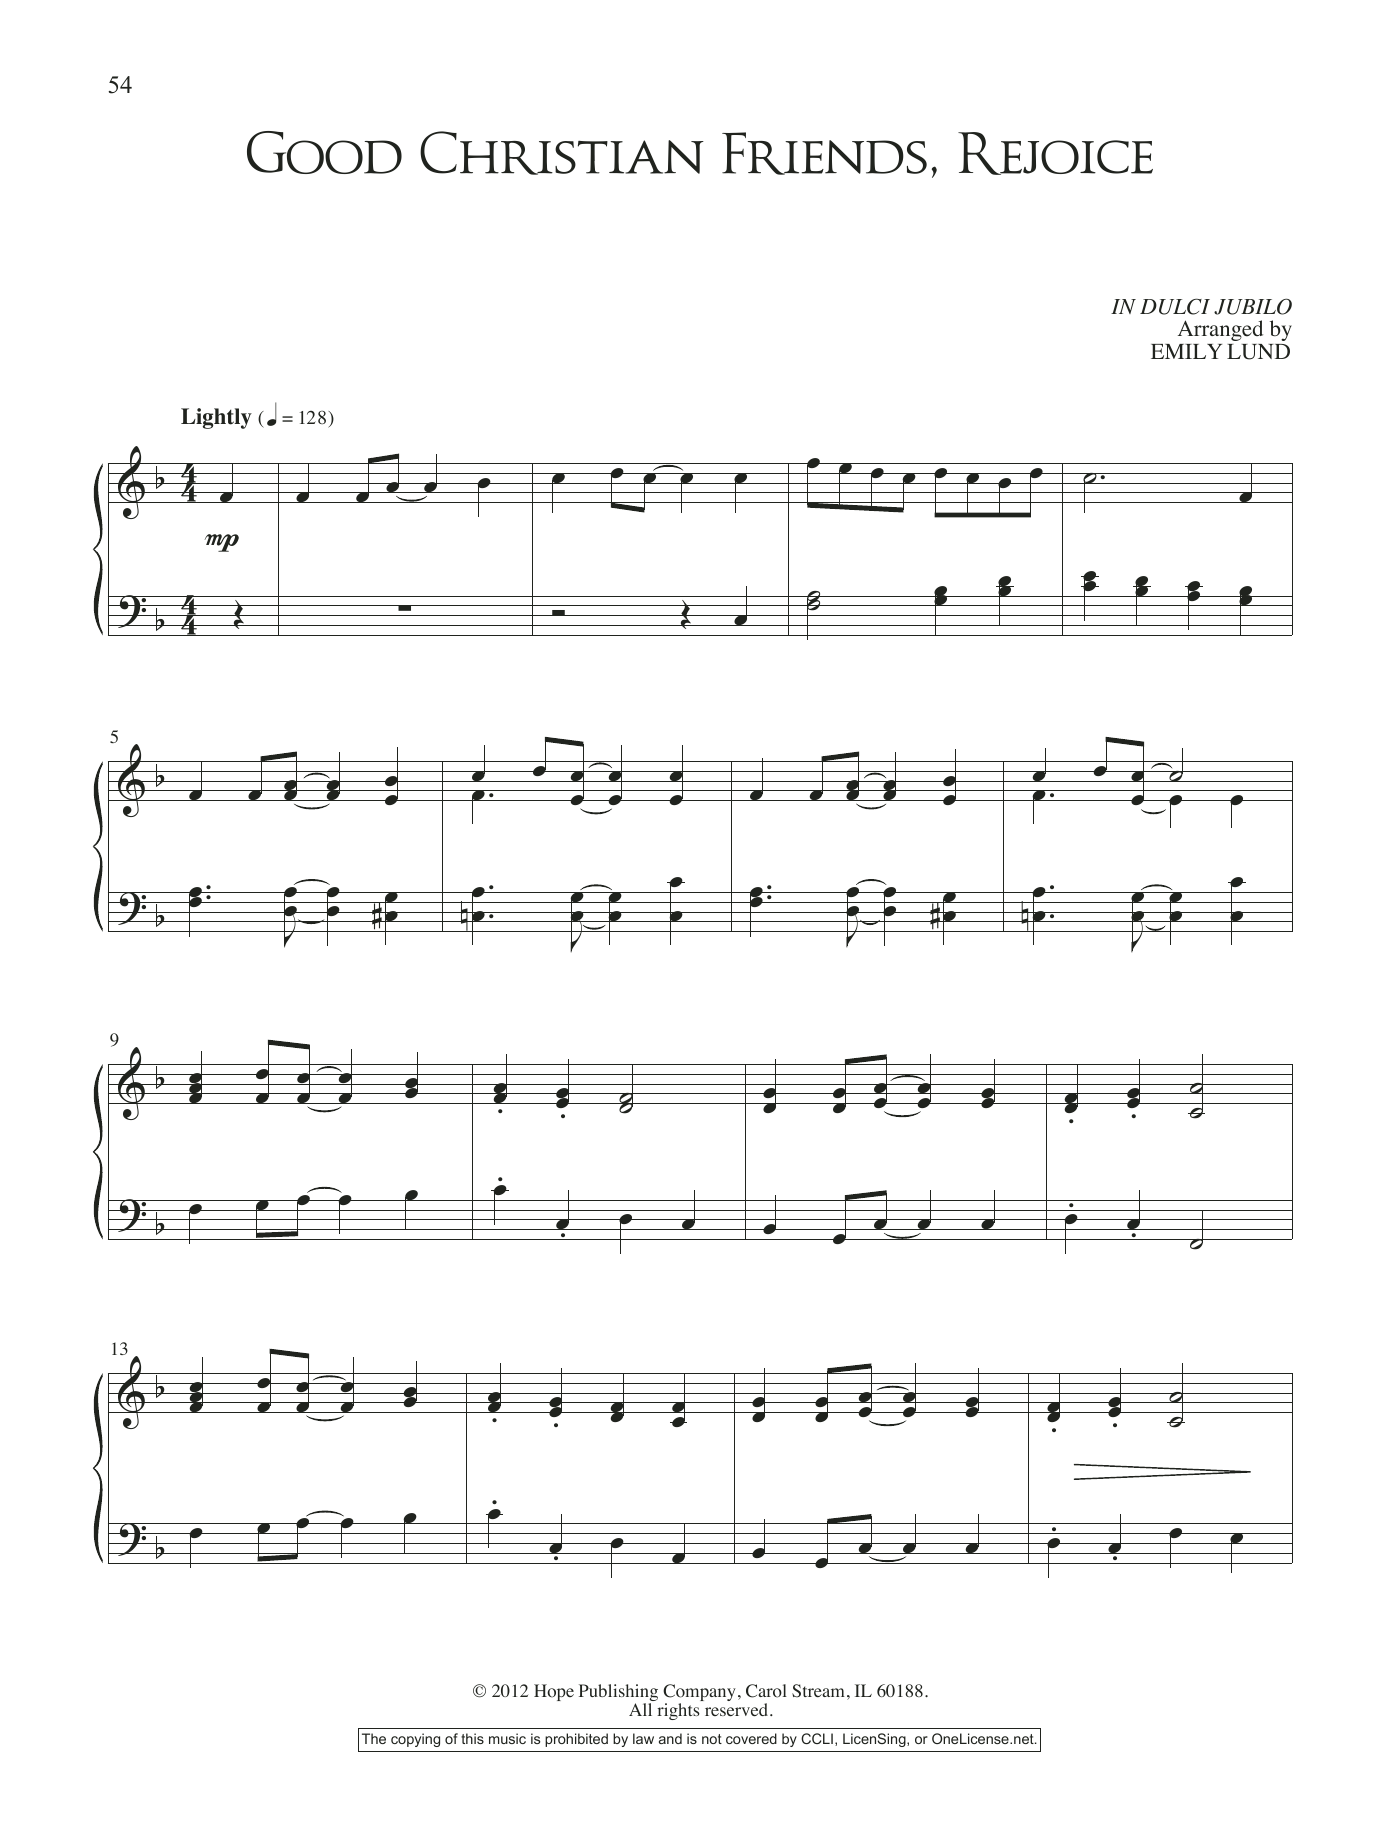 Download Emily Lund Good Christian Friends, Rejoice Sheet Music